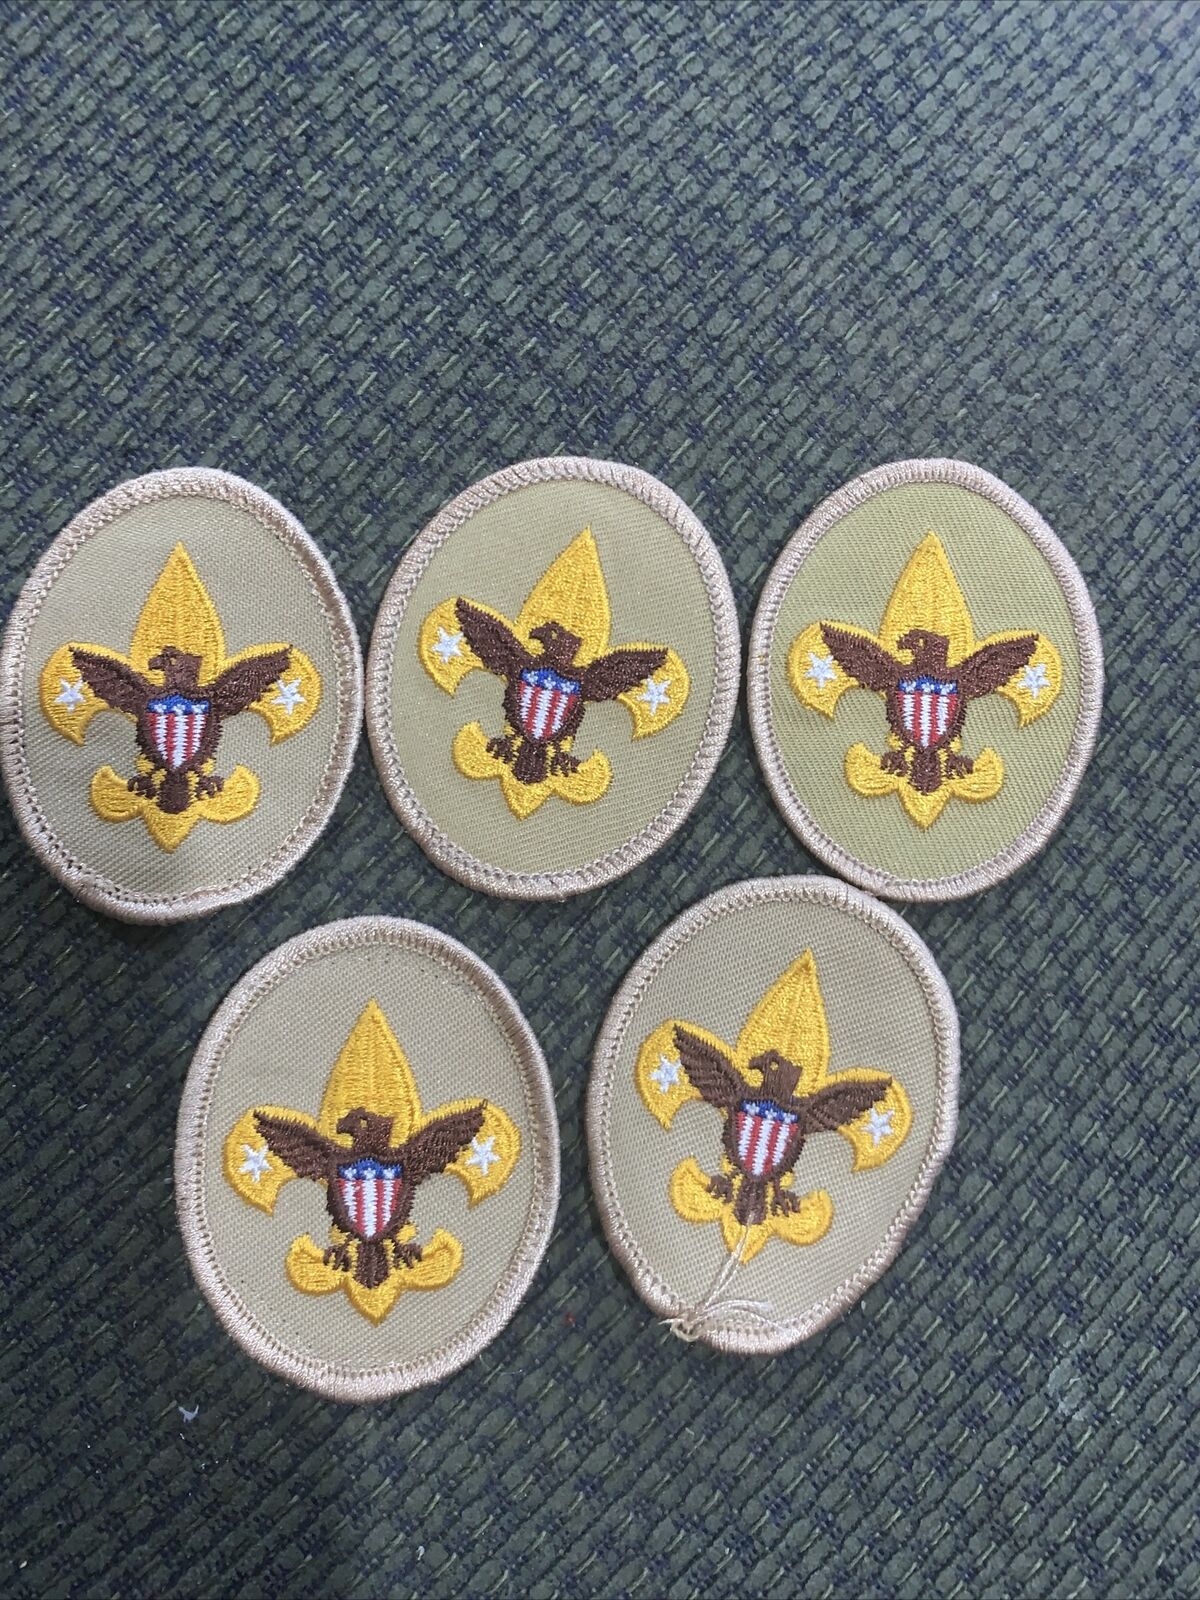 Used Current Issue Tenderfoot Scout Rank Oval Boy Scout Patch